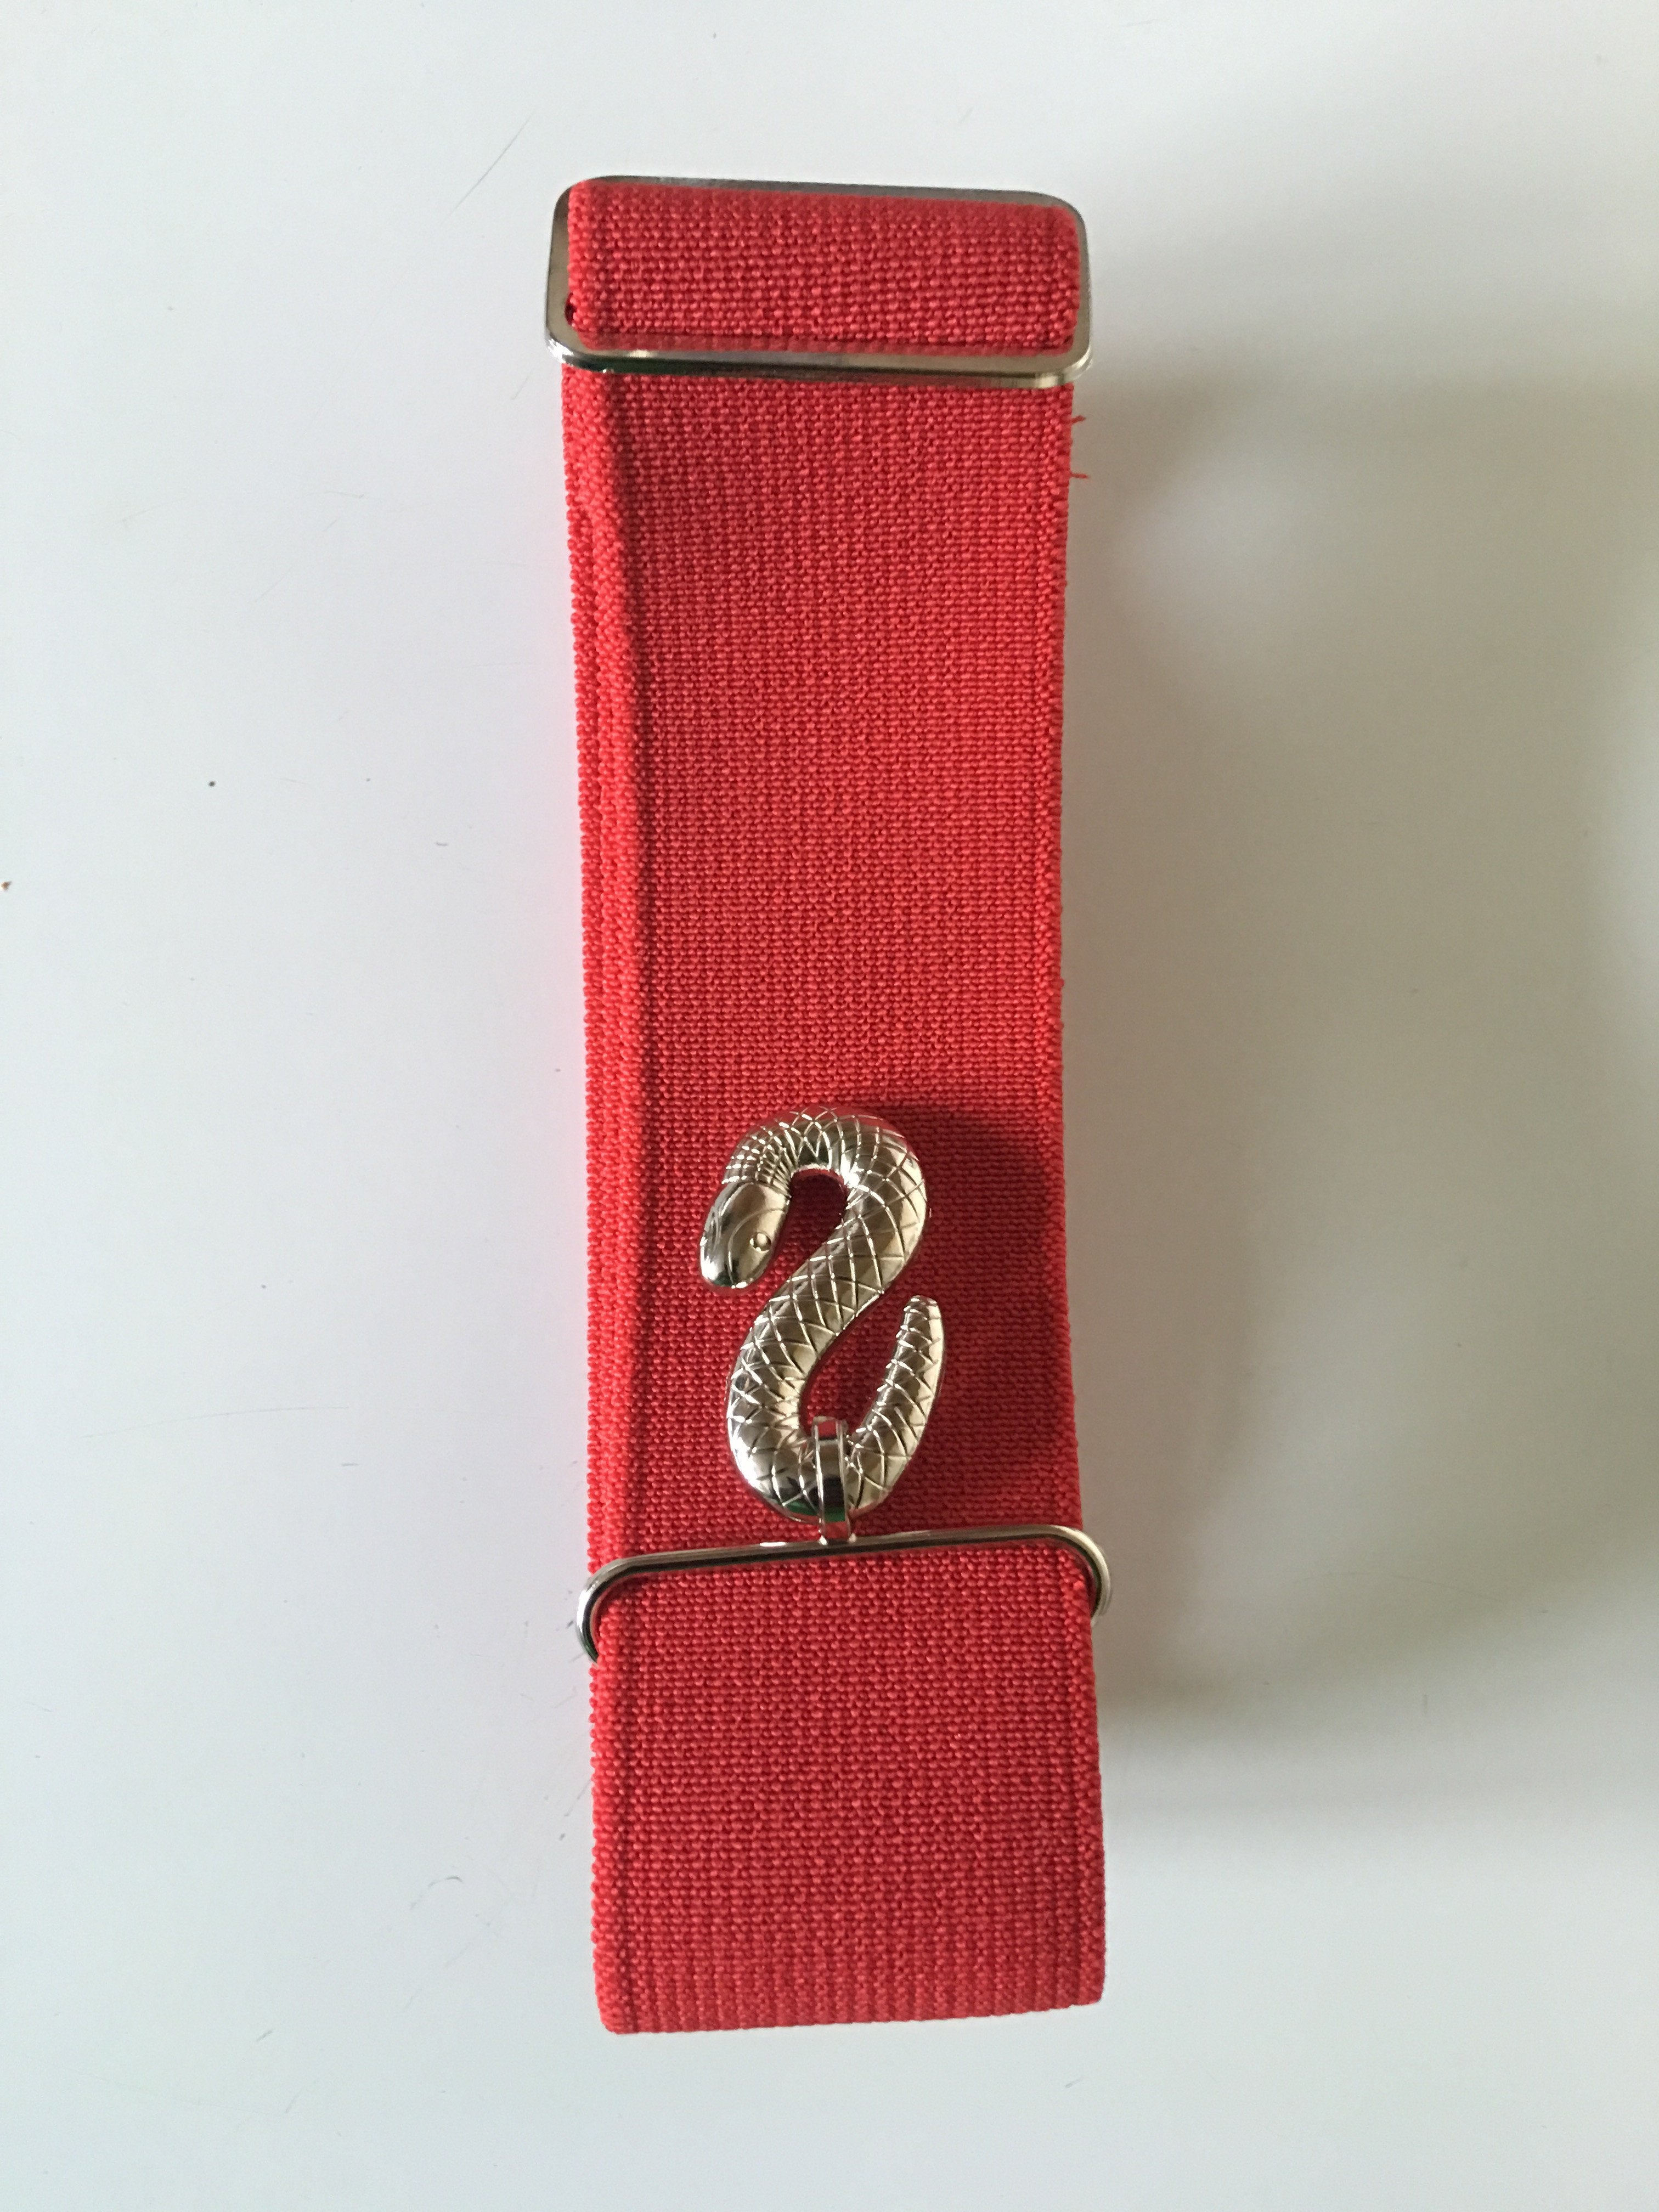 PTI RED BELT WITH “S” CLASP 1905